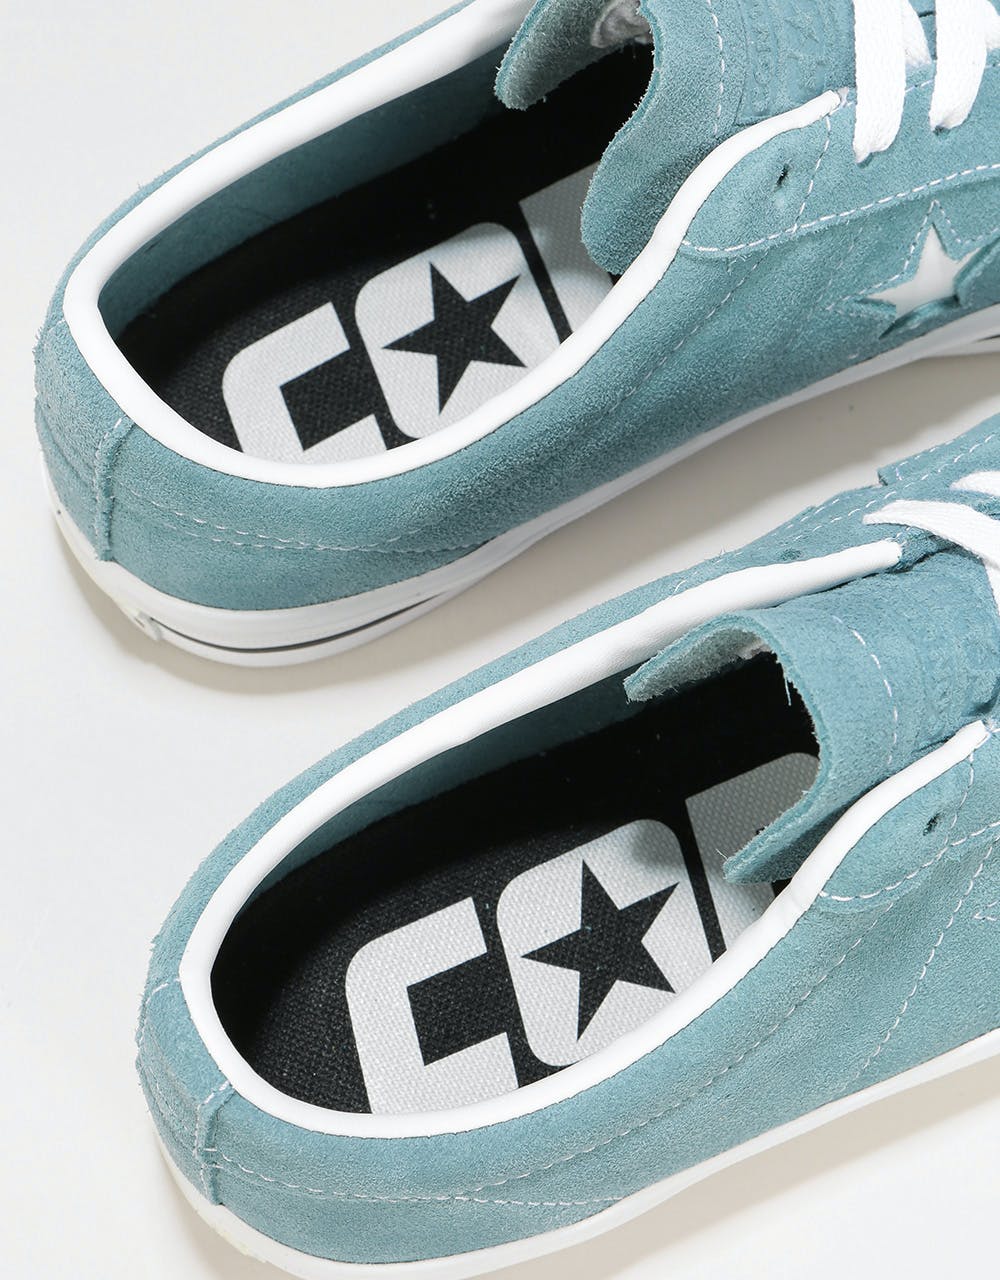 Converse One Star Pro Ox Skate Shoes - Celestial Teal/Black/White